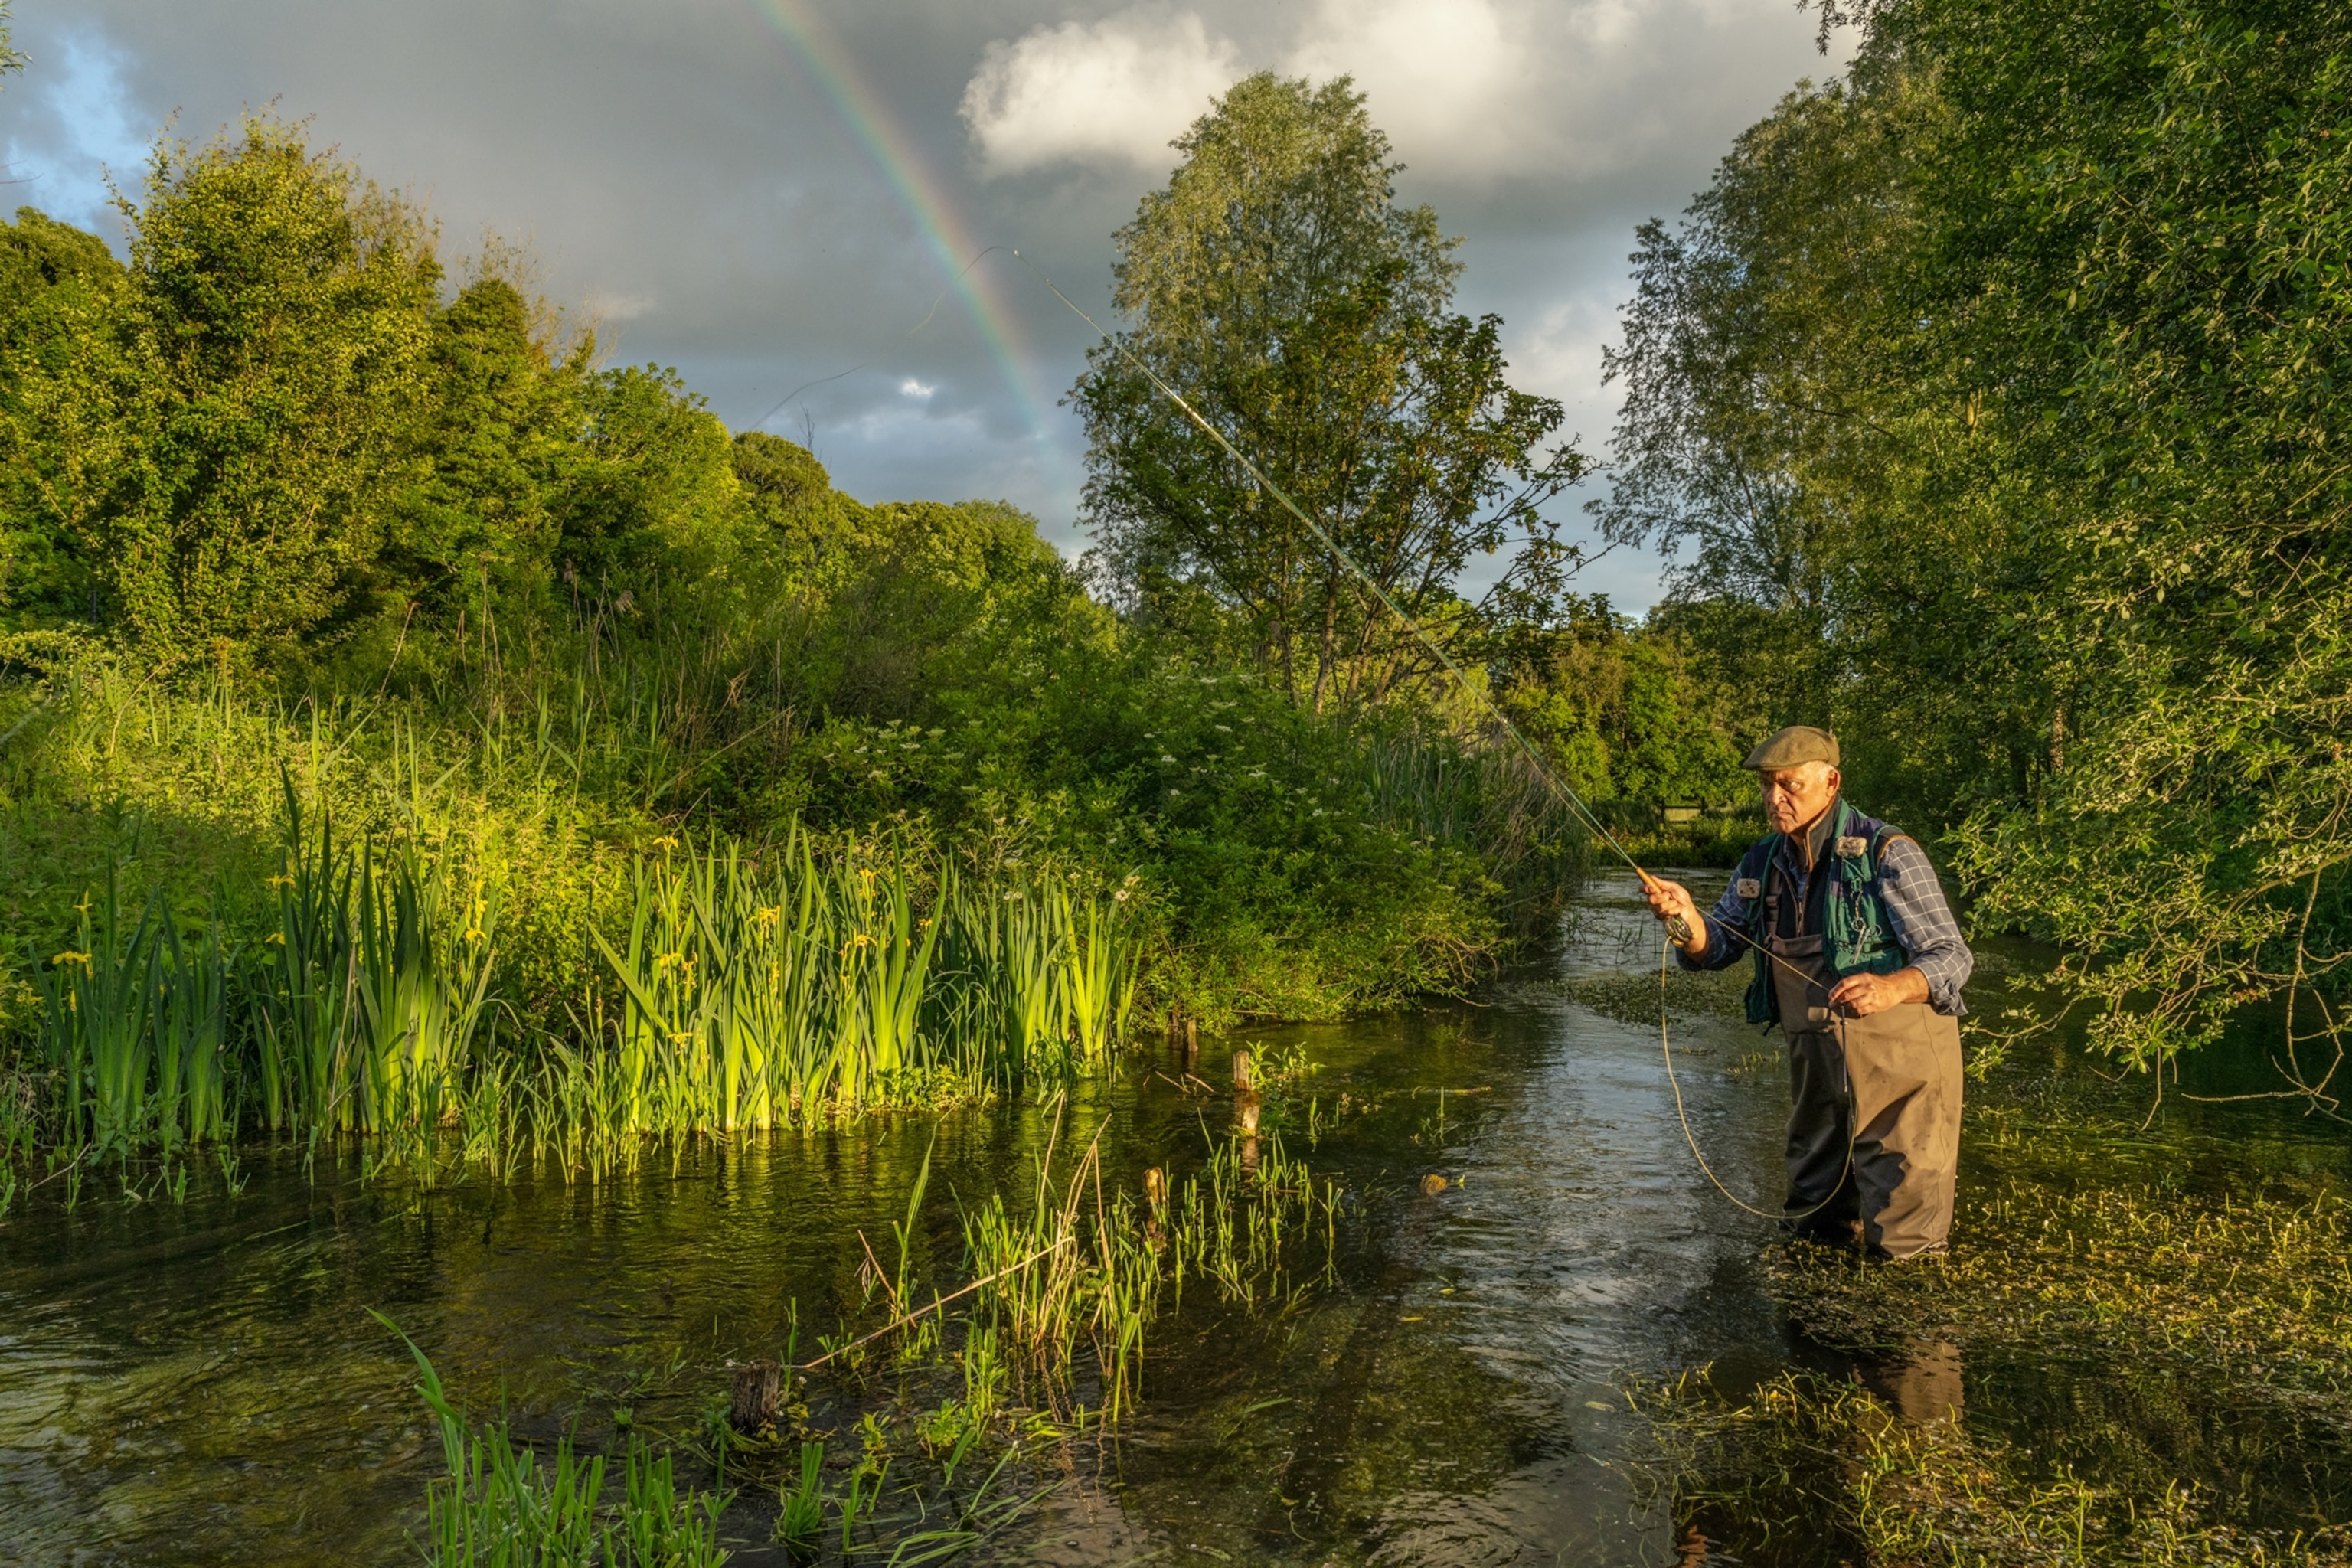 Simon is knee-deep fishing in the stream. A rainbow is behind him in the top left corner of the frame.